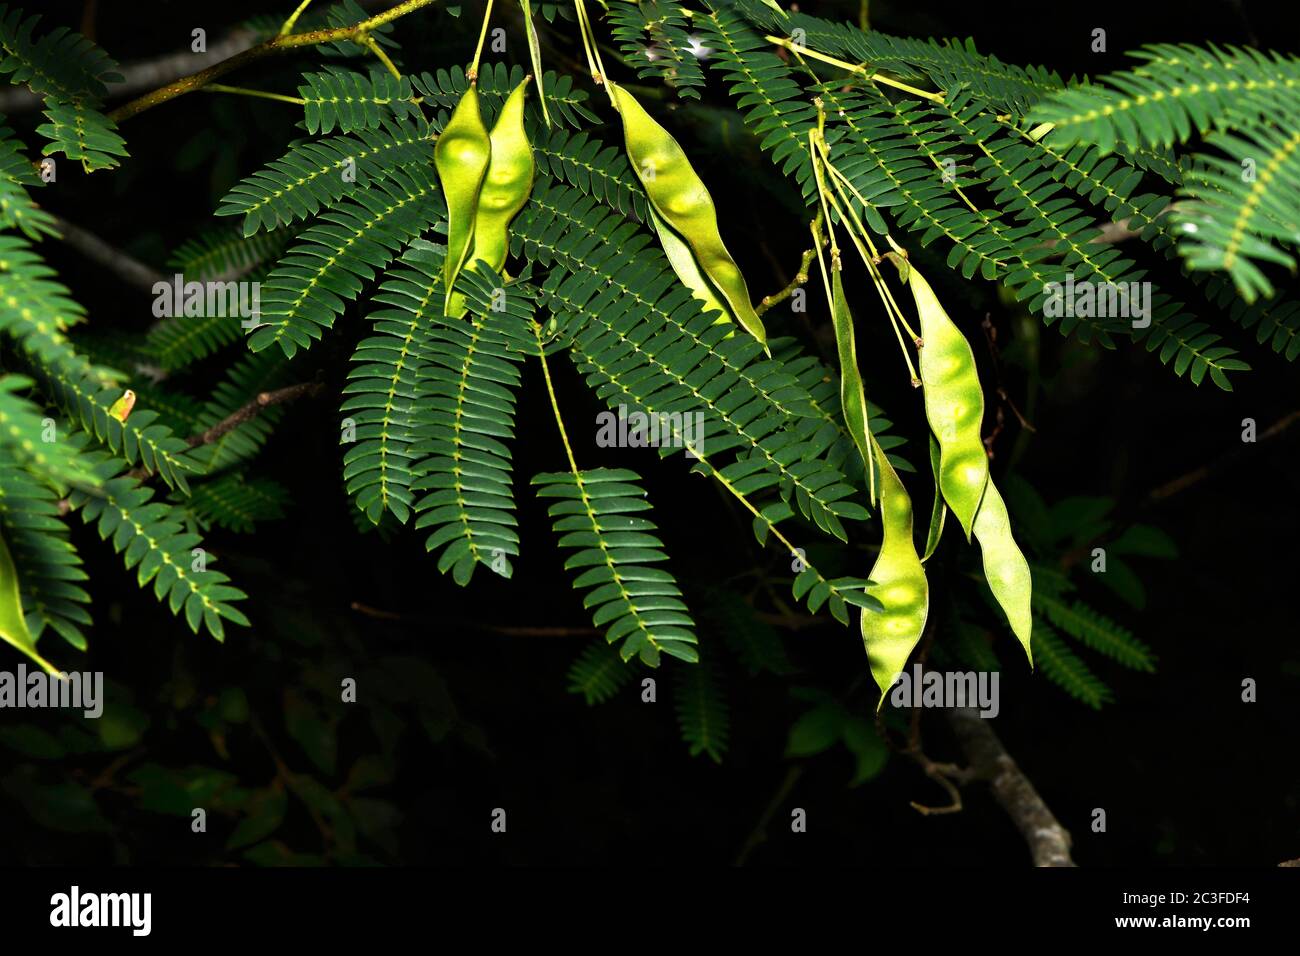 Mimosa seed pods Stock Photo